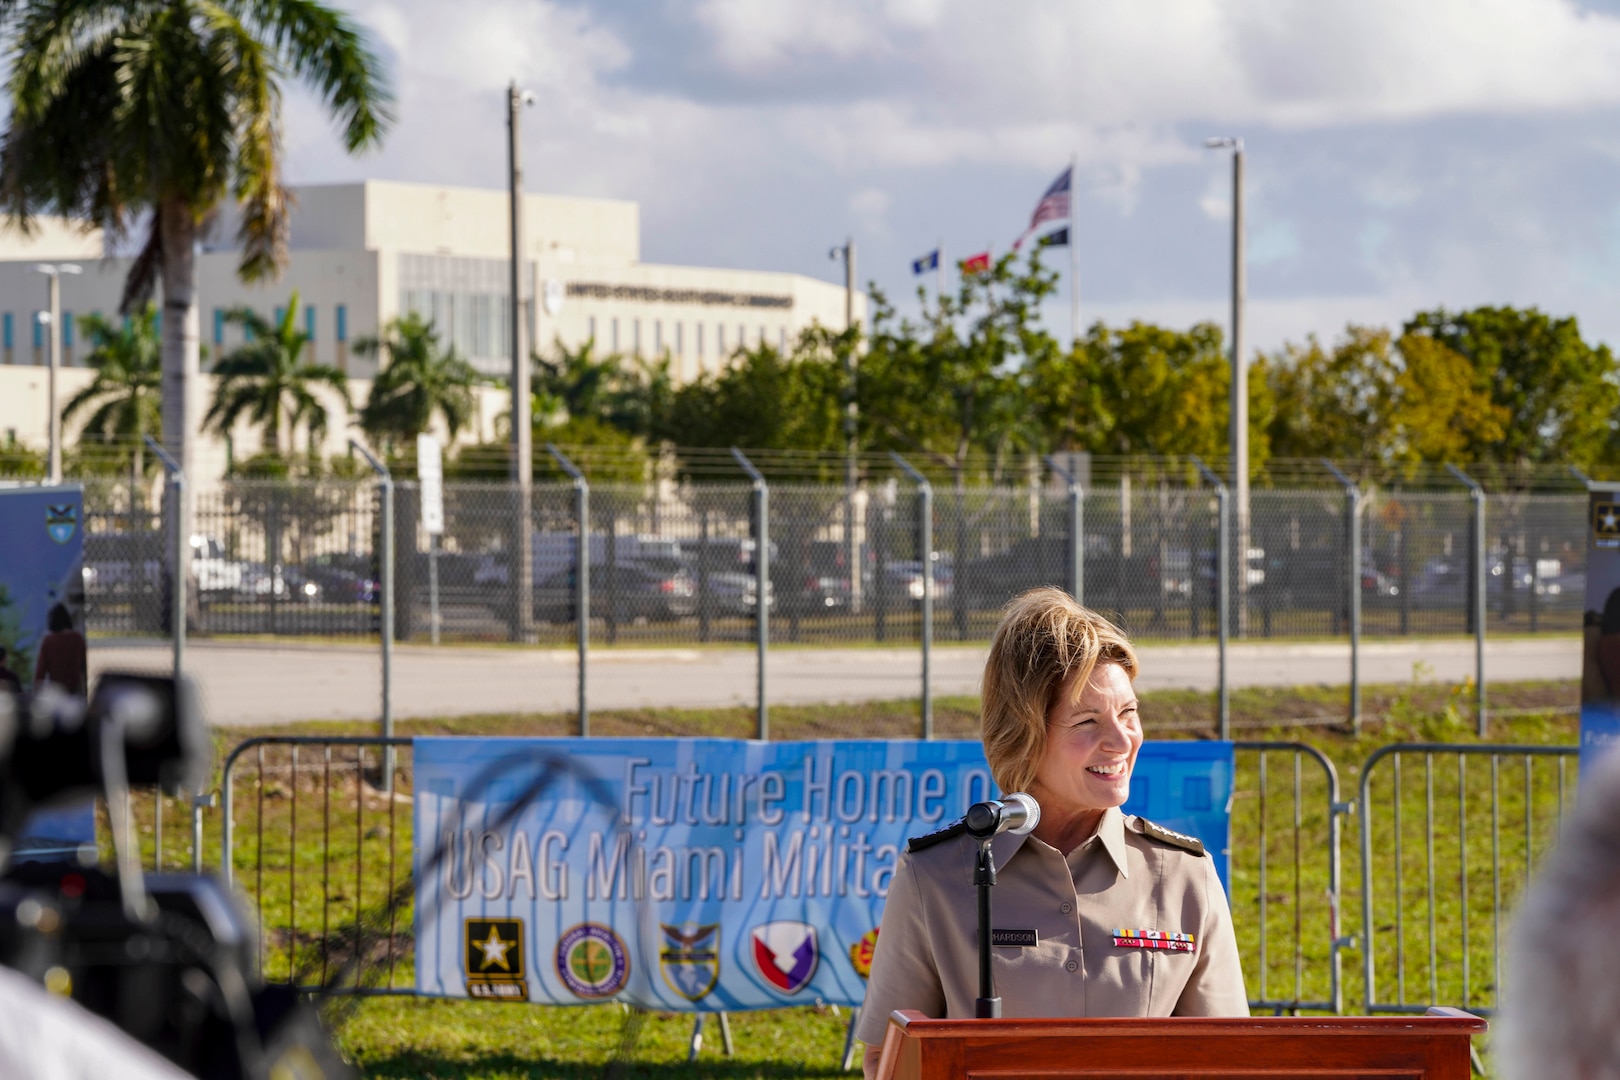 Gen. Laura Richardson, commander of U.S. Southern Command (SOUTHCOM), speaks during a groundbreaking ceremony for the future site of the new military housing complex supporting SOUTHCOM's service members and their families.